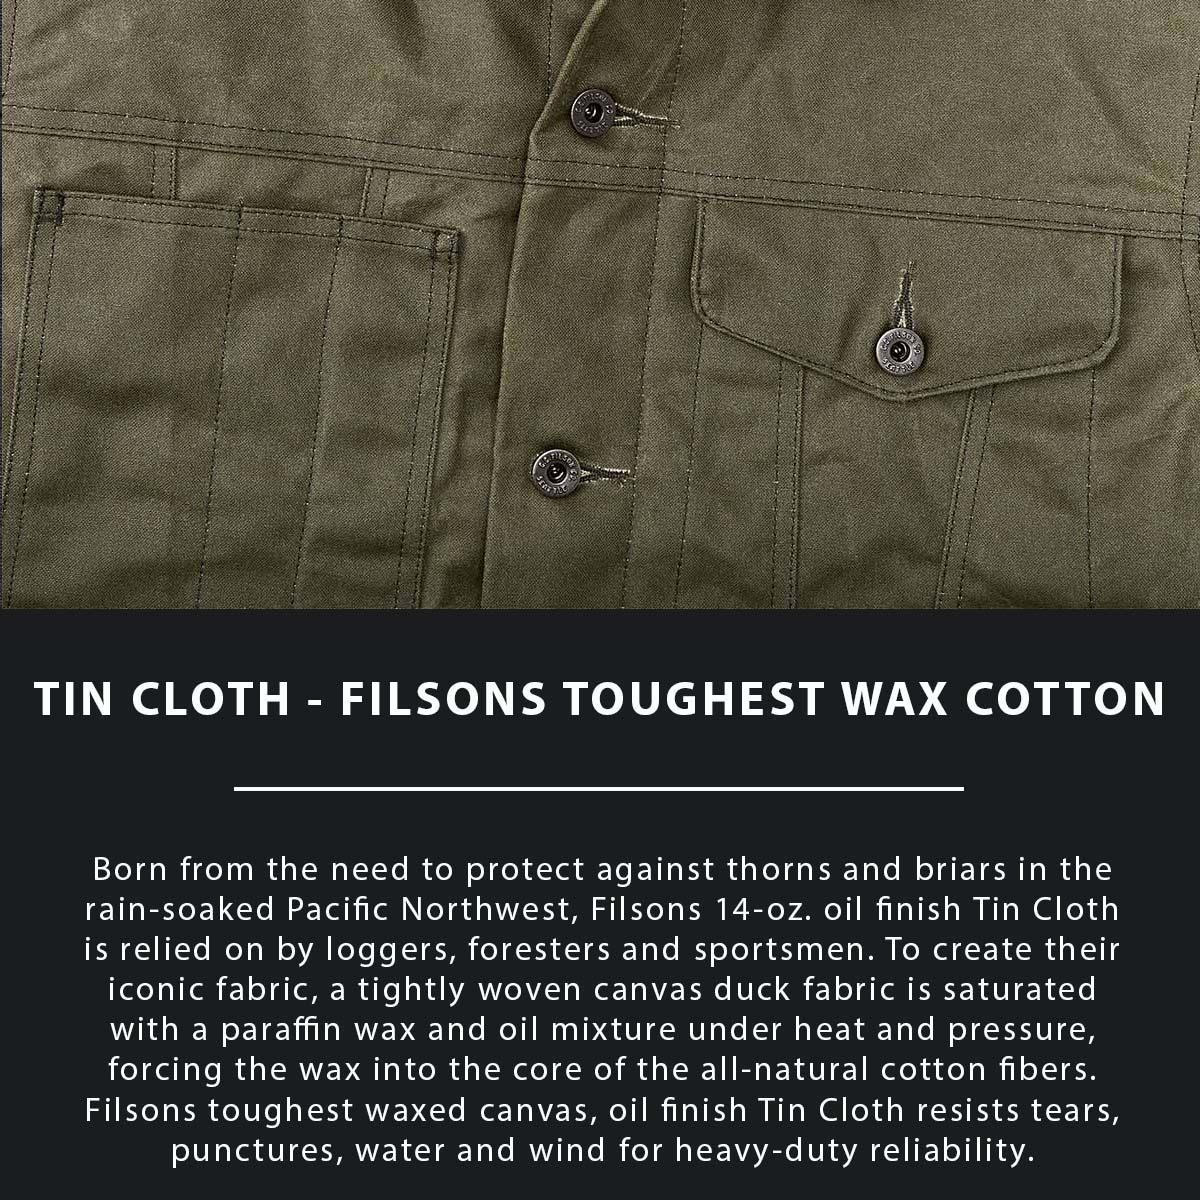 Filson Tin Cloth Short Lined Cruiser Jacket Military Green, made of the legendary super strong, lightweight, and oil impregnated 14-oz. Tin Cloth canvas